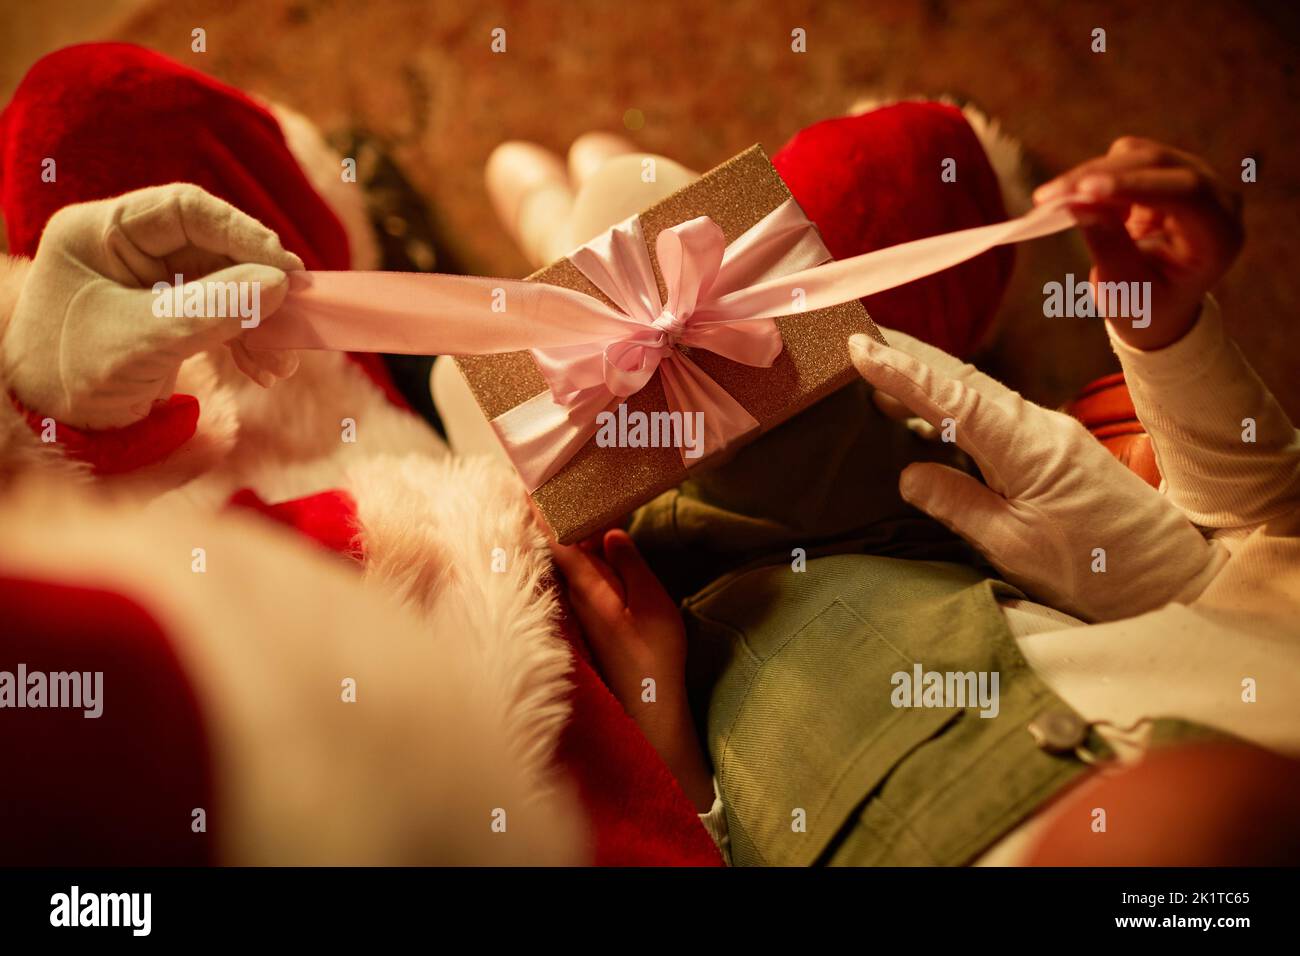 Top view closeup of little girl opening Christmas present while sitting in Santas lap, copy space Stock Photo